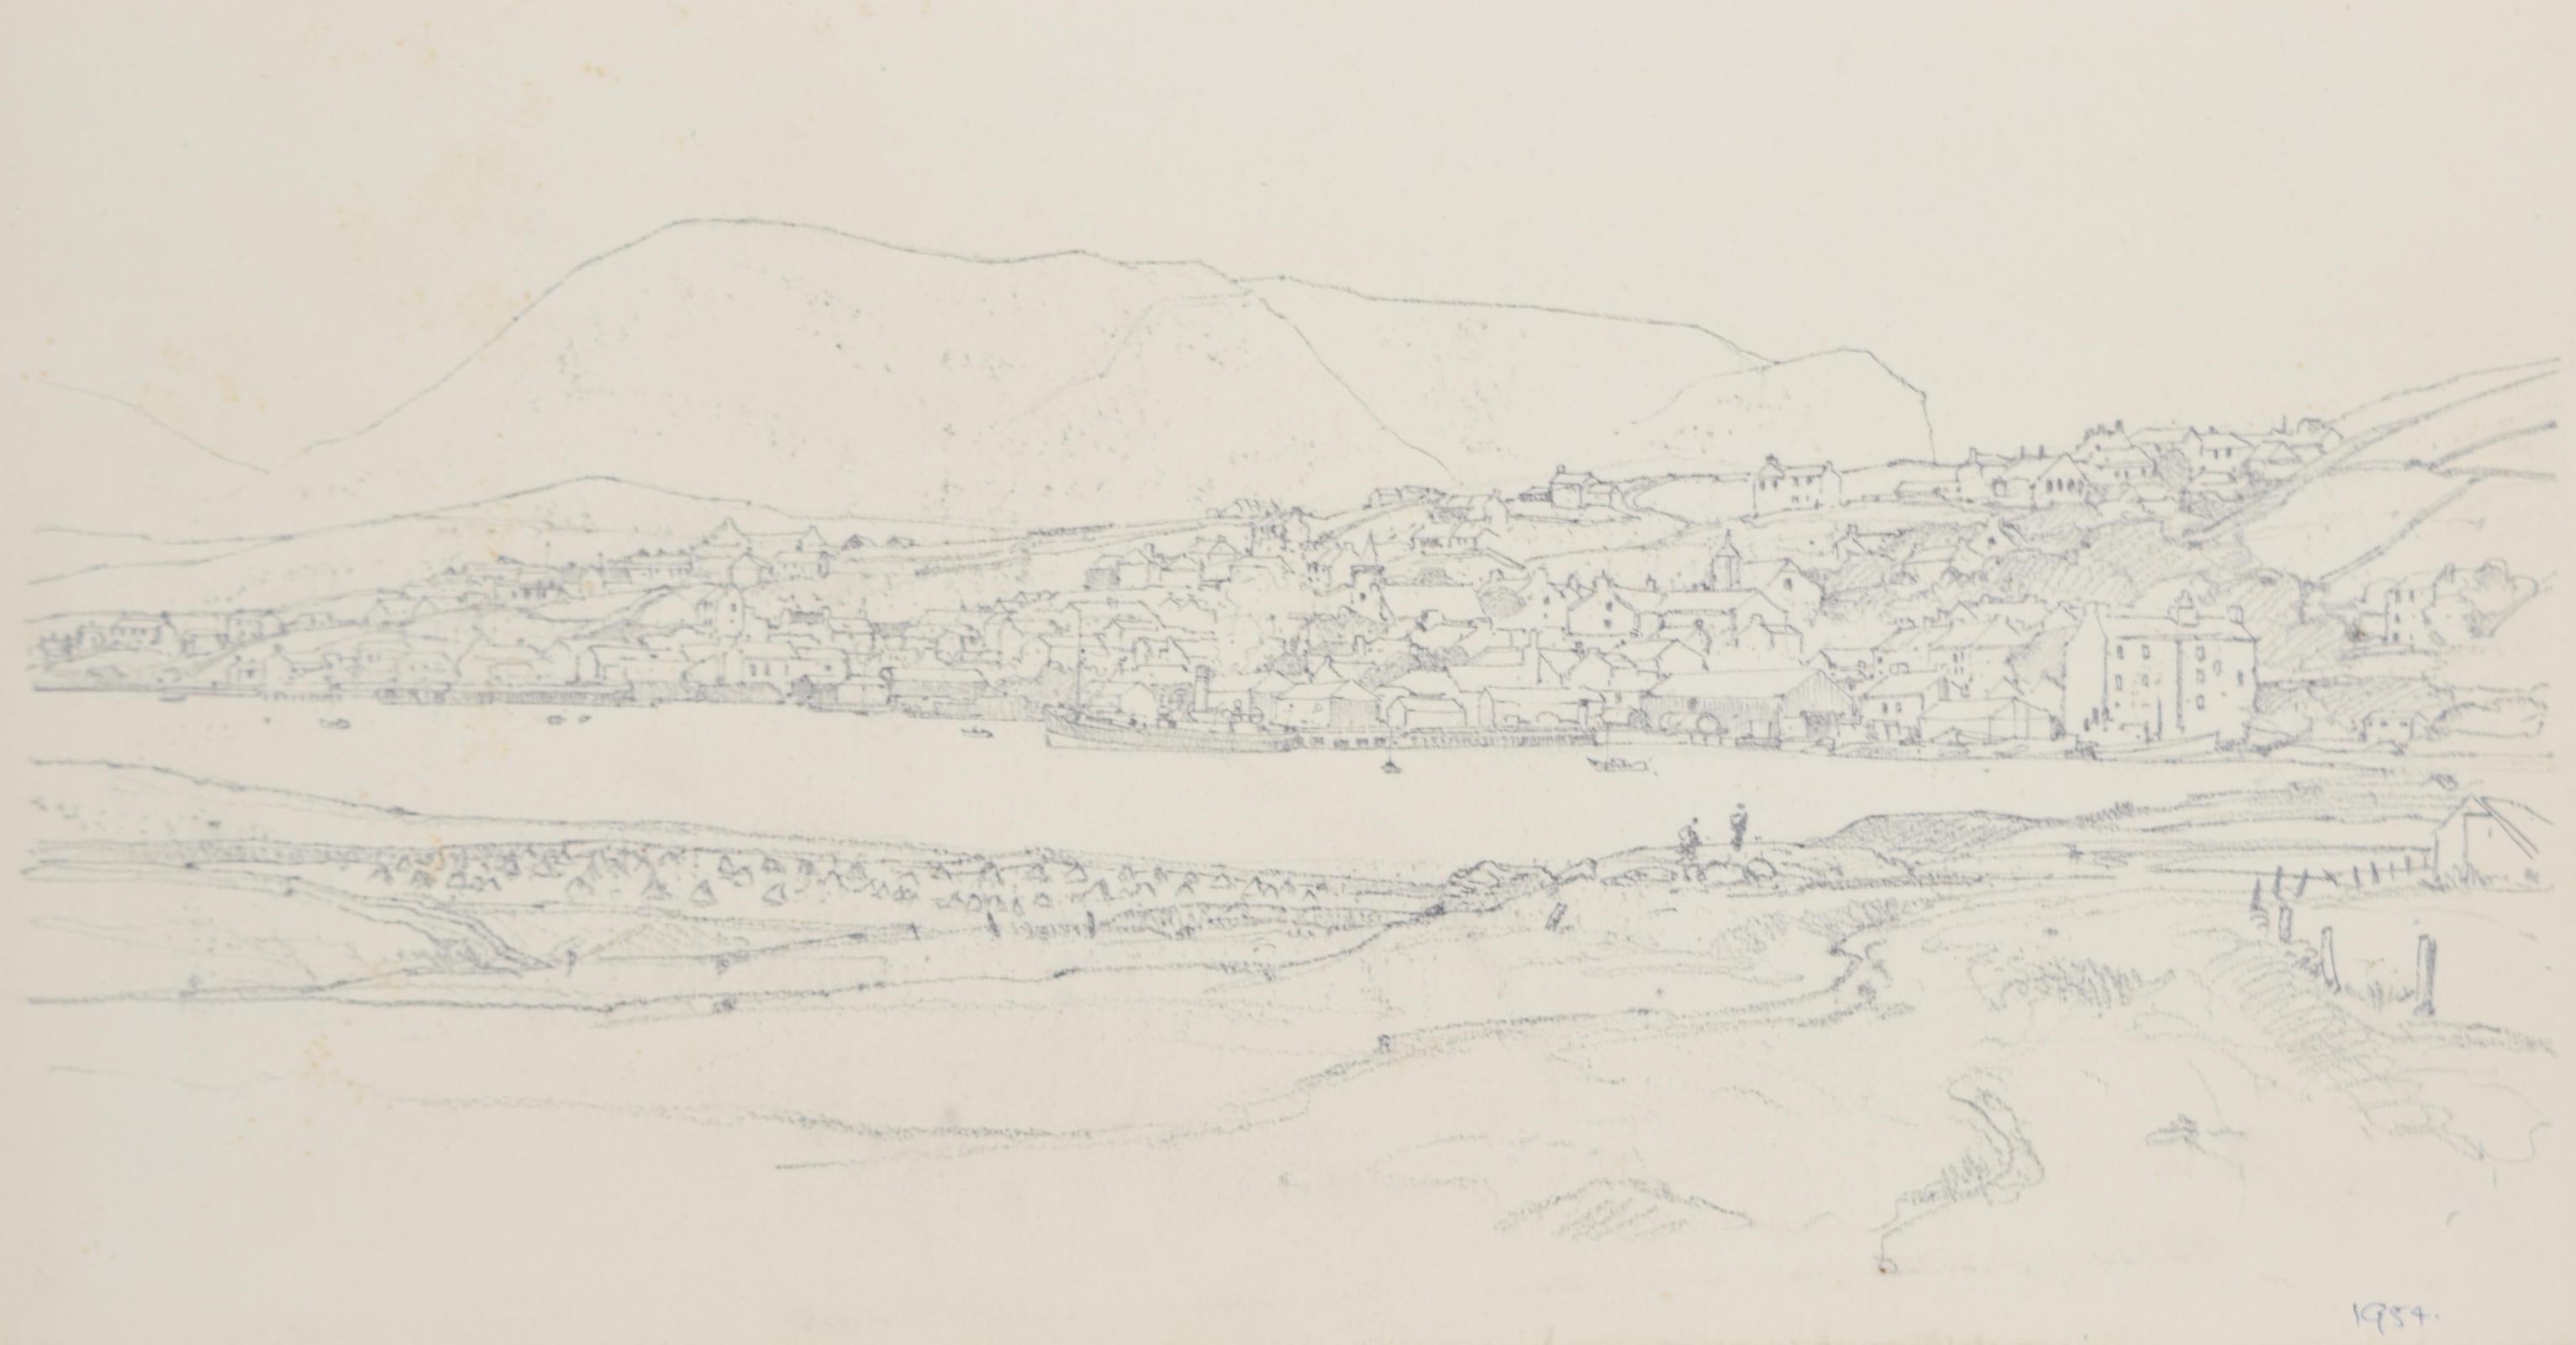 We acquired a series of paintings from Claude Muncaster's studio. To find more scroll down to "More from this Seller" and below it click on "See all from this seller." 

Claude Muncaster (1903 - 1974)
Stromness, Orkney
Pencil drawing
23 x 53 cm

A